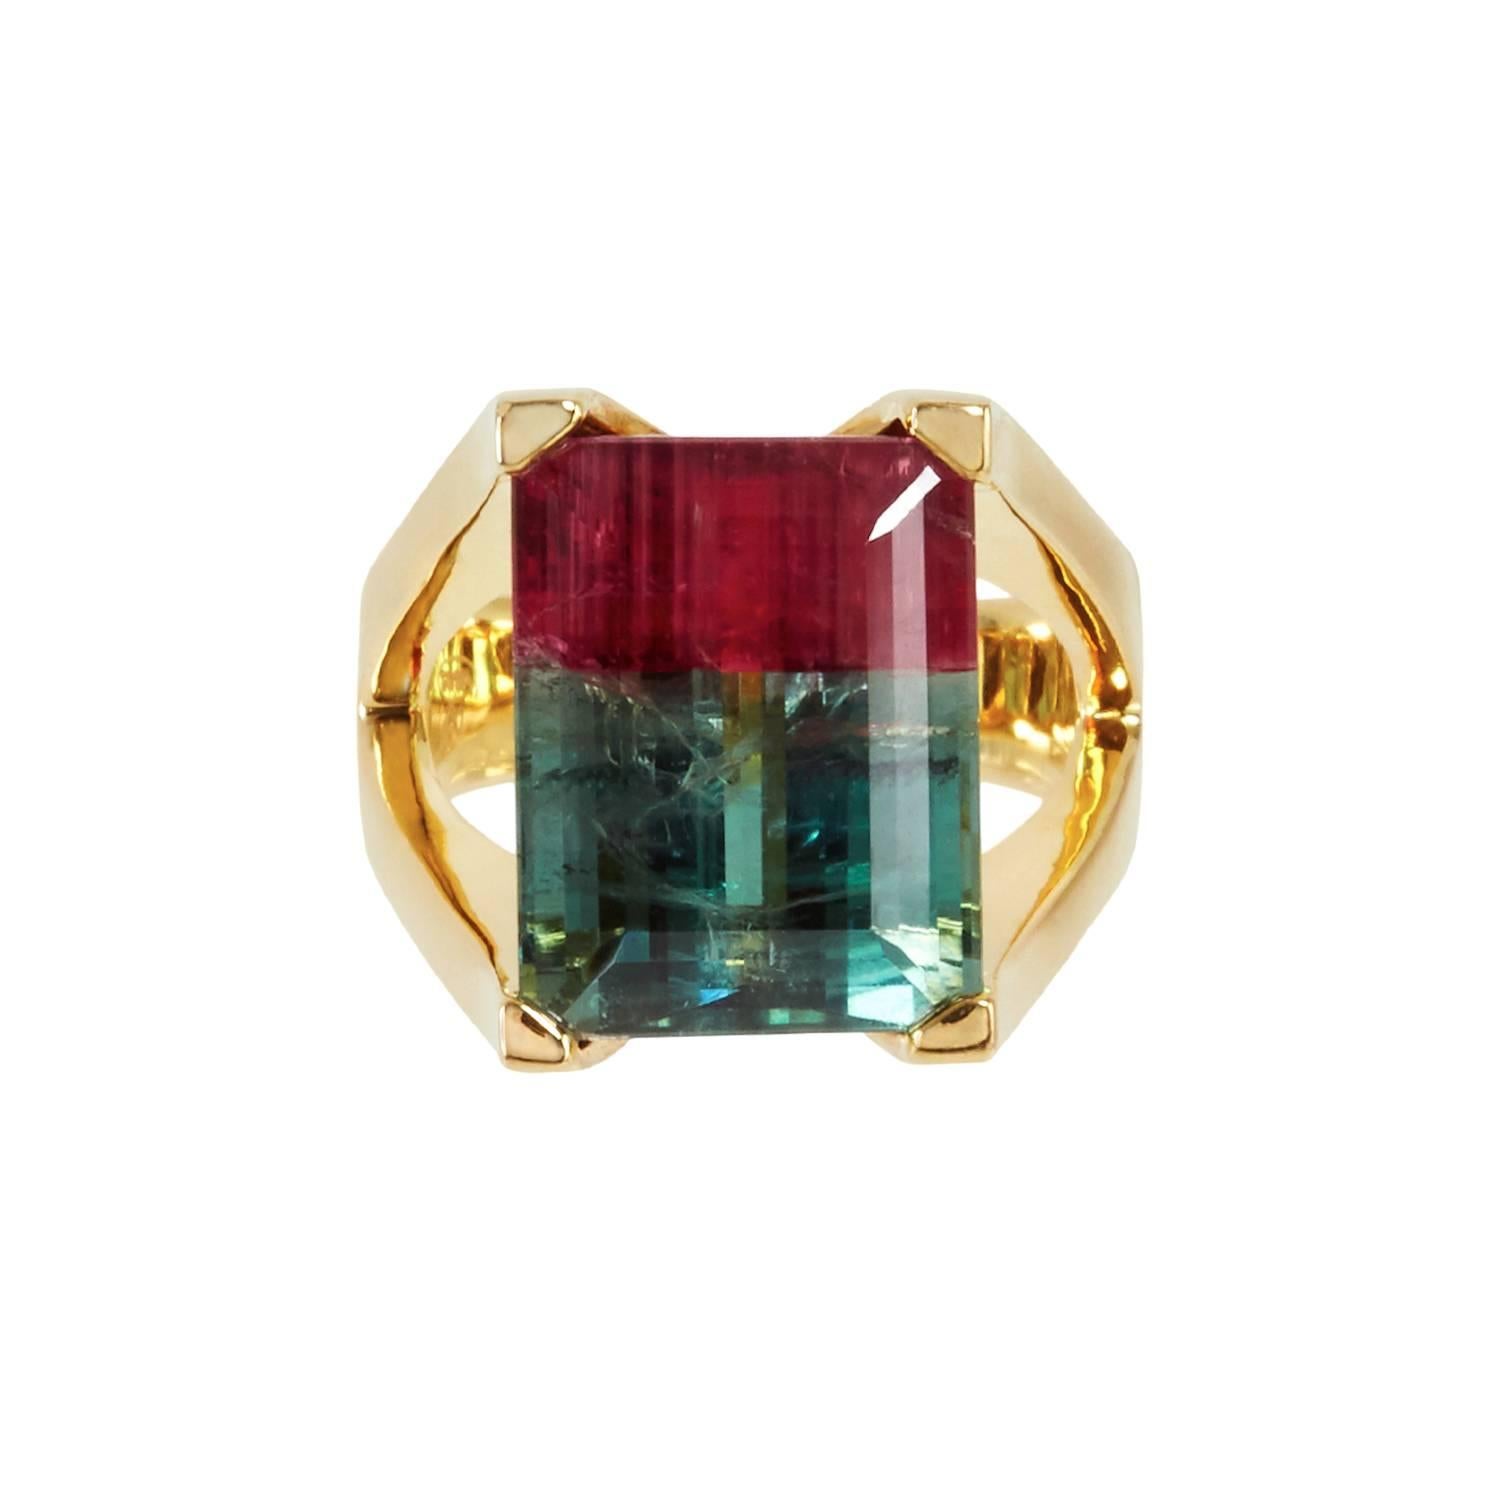 Inspired by the Chinese traditional Mahjong, this 12.04 carat bi-colour pink and green tourmaline is truly one of a kind, handmade in 18K yellow gold.

Gemstone descriptions:
1 Watermelon tourmaline 12.04 ct

IGI Report no. M1H38036 (for